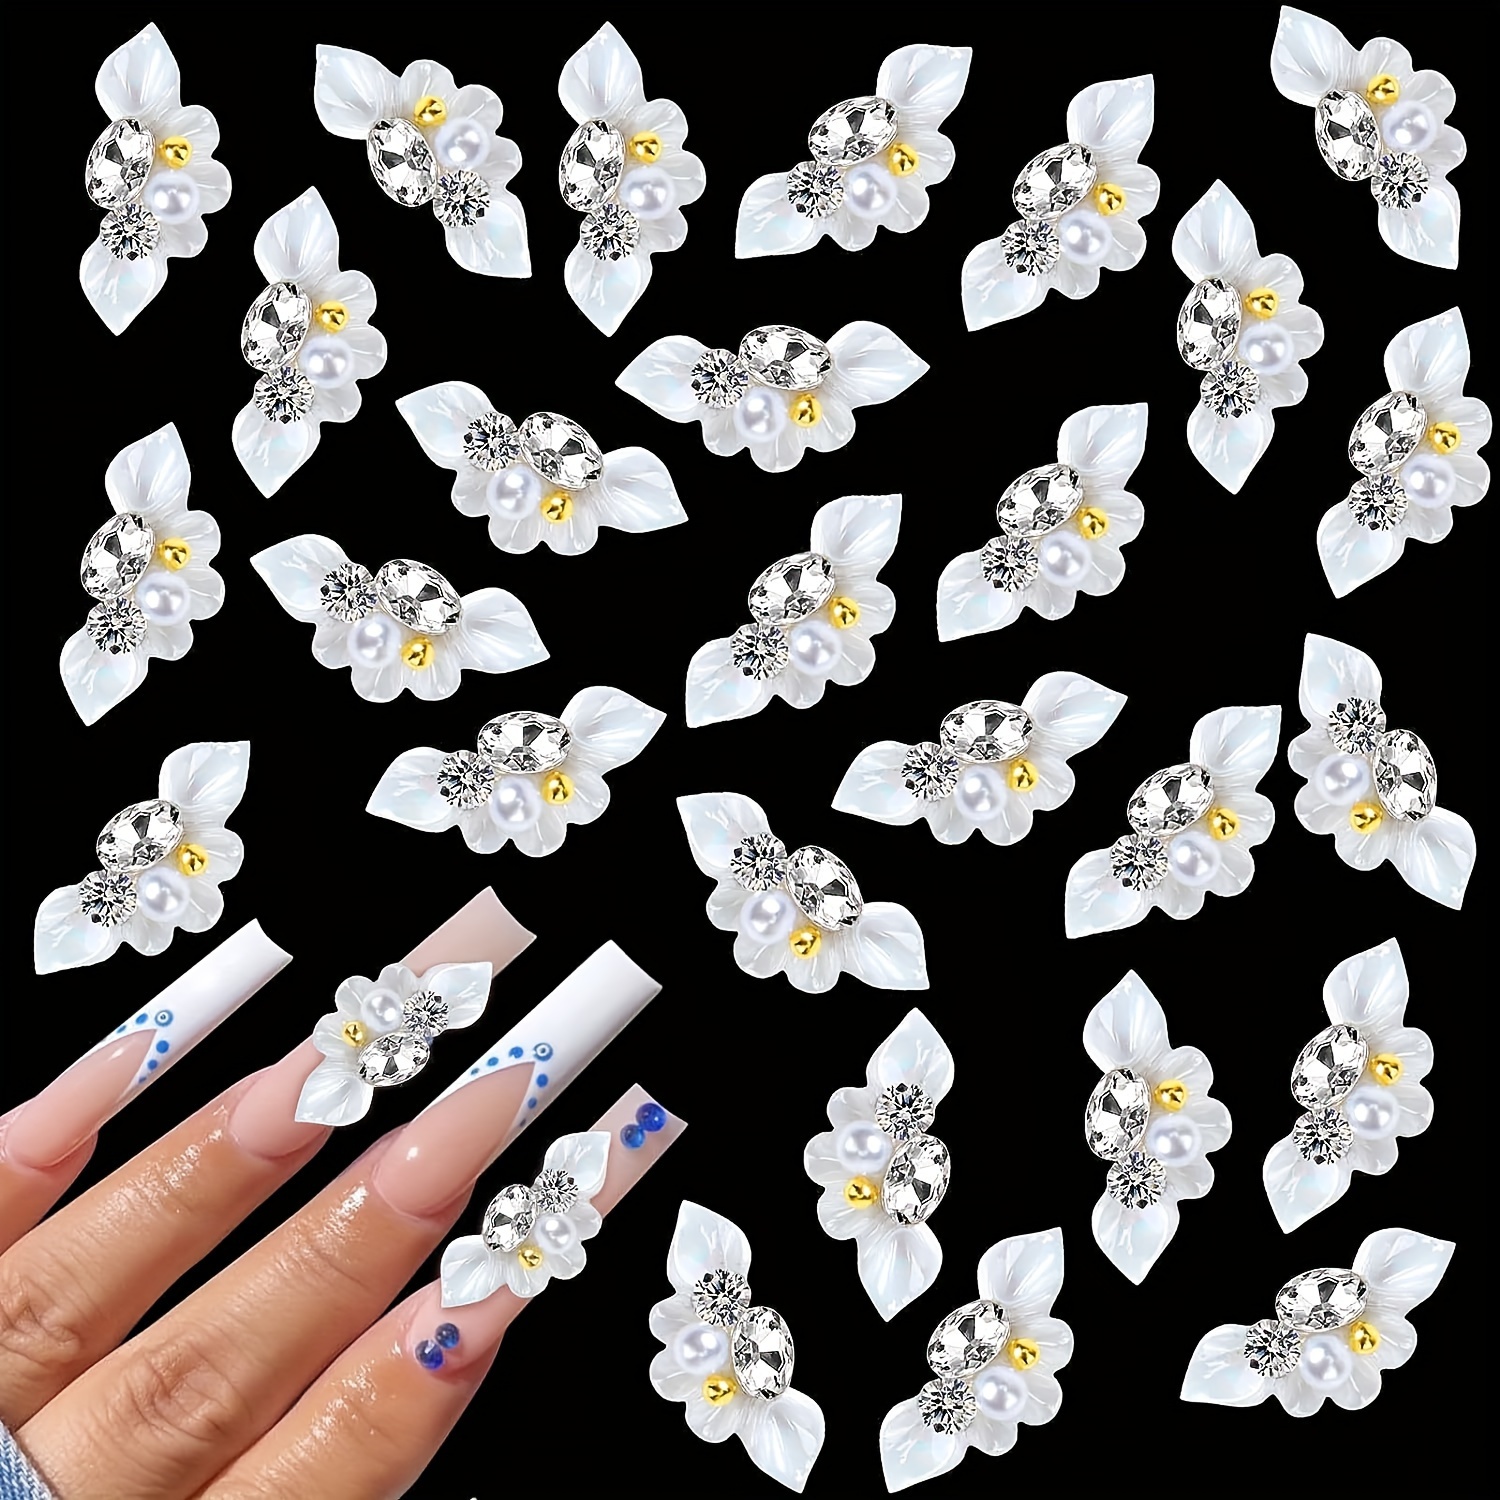 

20pcs 3d Flower Nail Charms With Pearls And Rhinestones, Nail Art Accessories,nail Art Supplies For Women And Girls,nail Art Jewelry